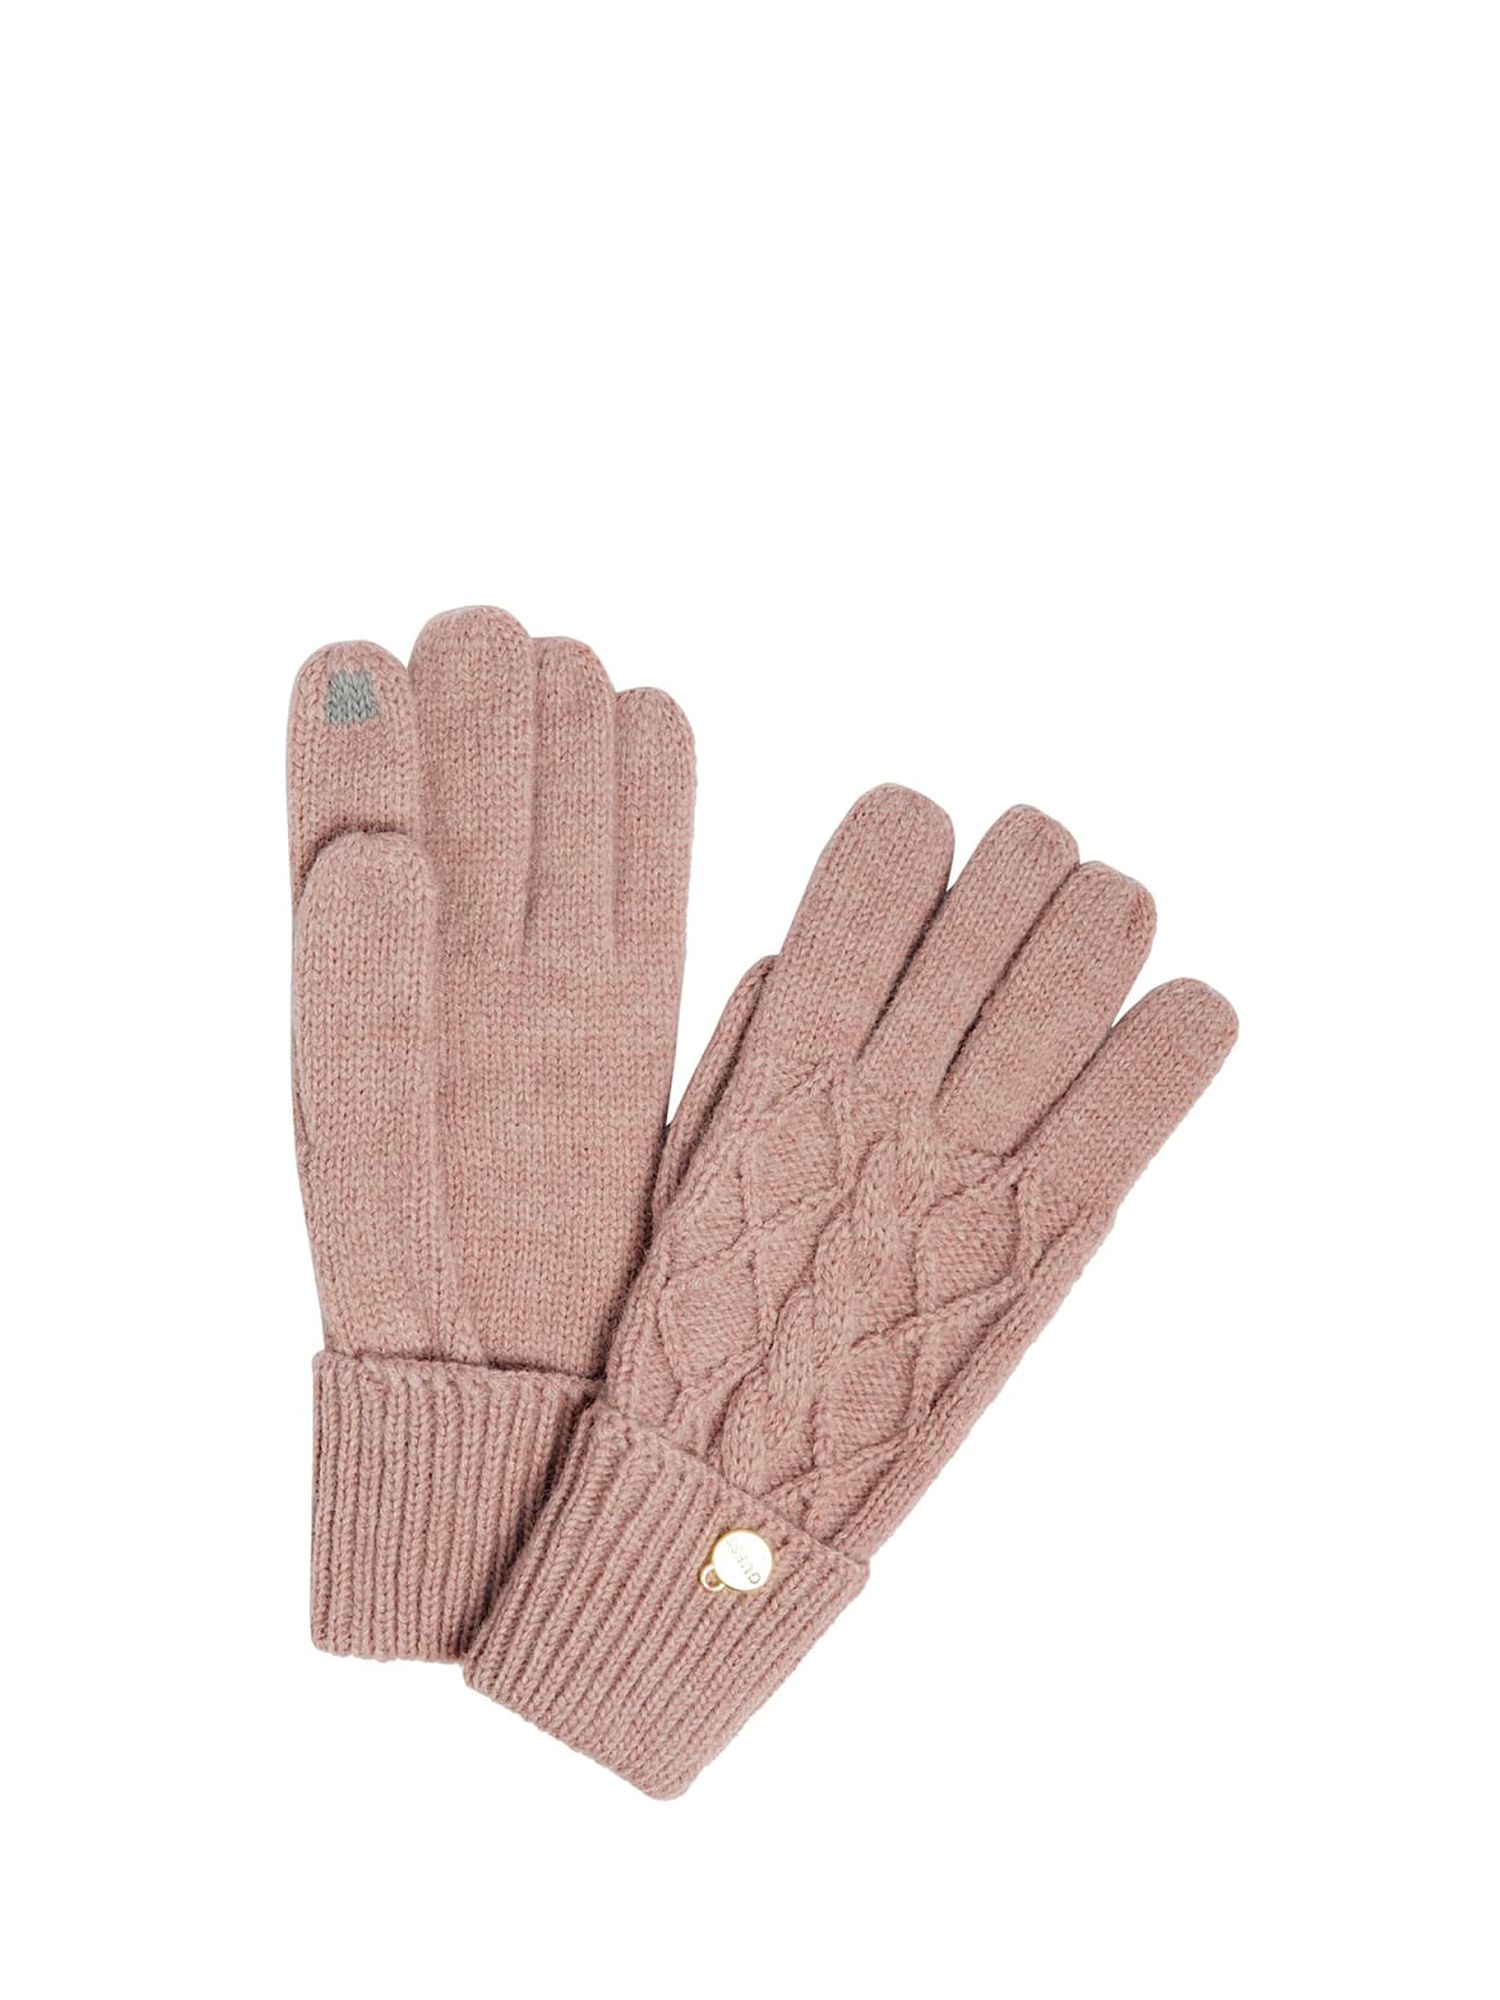 GUESS Cable Knit Gloves, Antique Rose, S